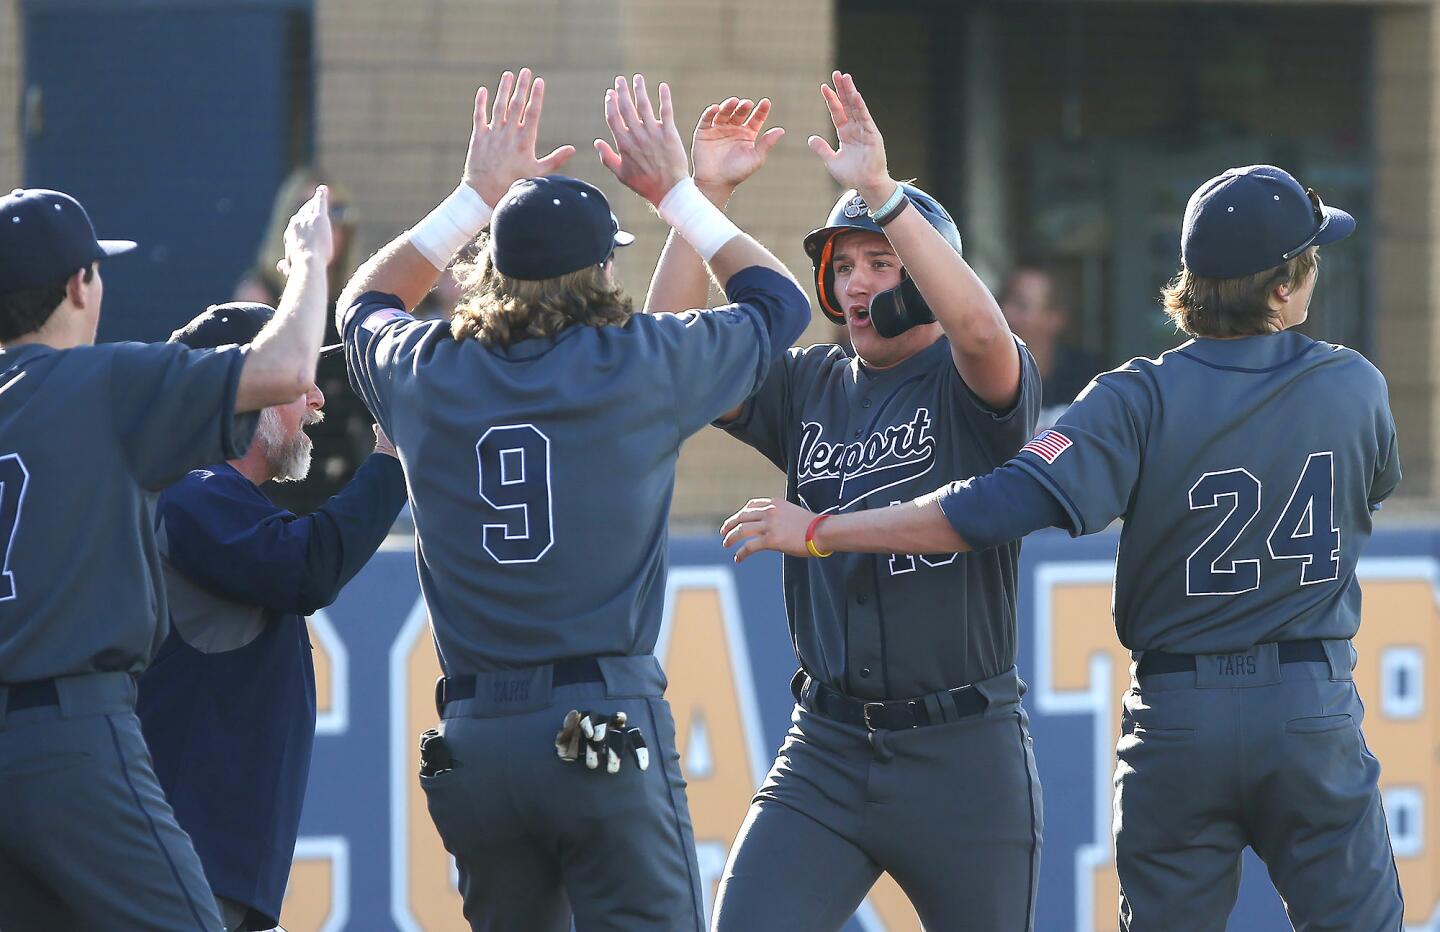 Newport Harbor High's Kelly Austin, middle, celebrates another run with teammates John Olmstead (9) and Braham Duncan (24) during the Battle of the Bay game against Corona del Mar at Orange Coast College on Wednesday.